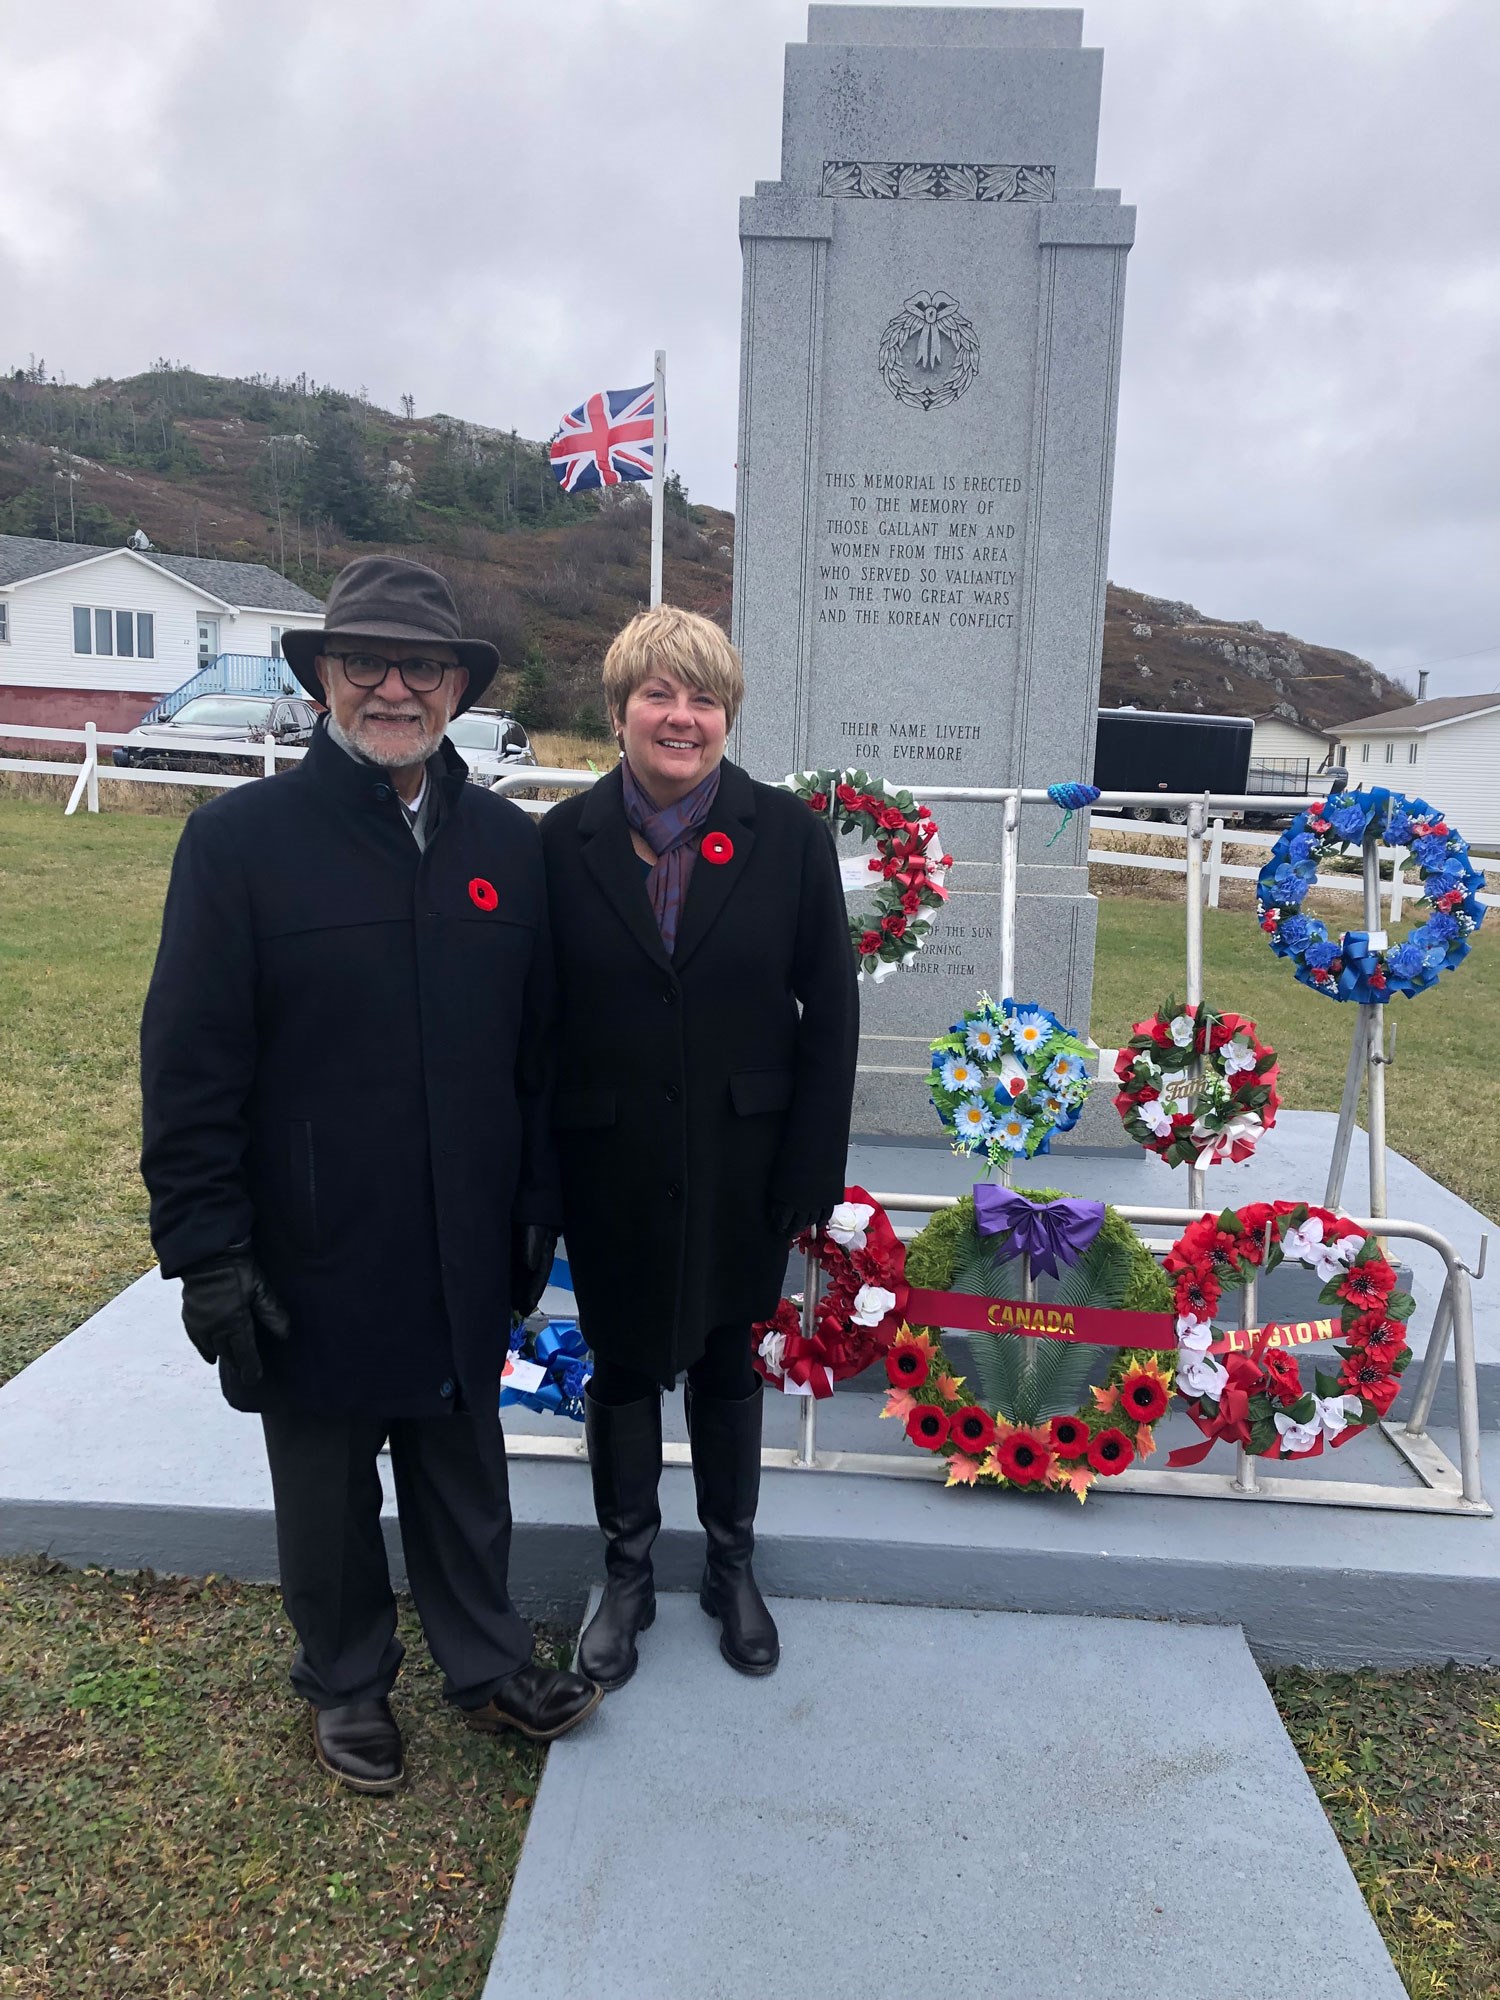 Thursday, November 11, 2021 – Senator Mohamed-Iqbal Ravalia and his wife, Dianne Ravalia, lay a wreath at the cenotaph in Twillingate, Newfoundland and Labrador on Remembrance Day to honour all those who have served Canada.